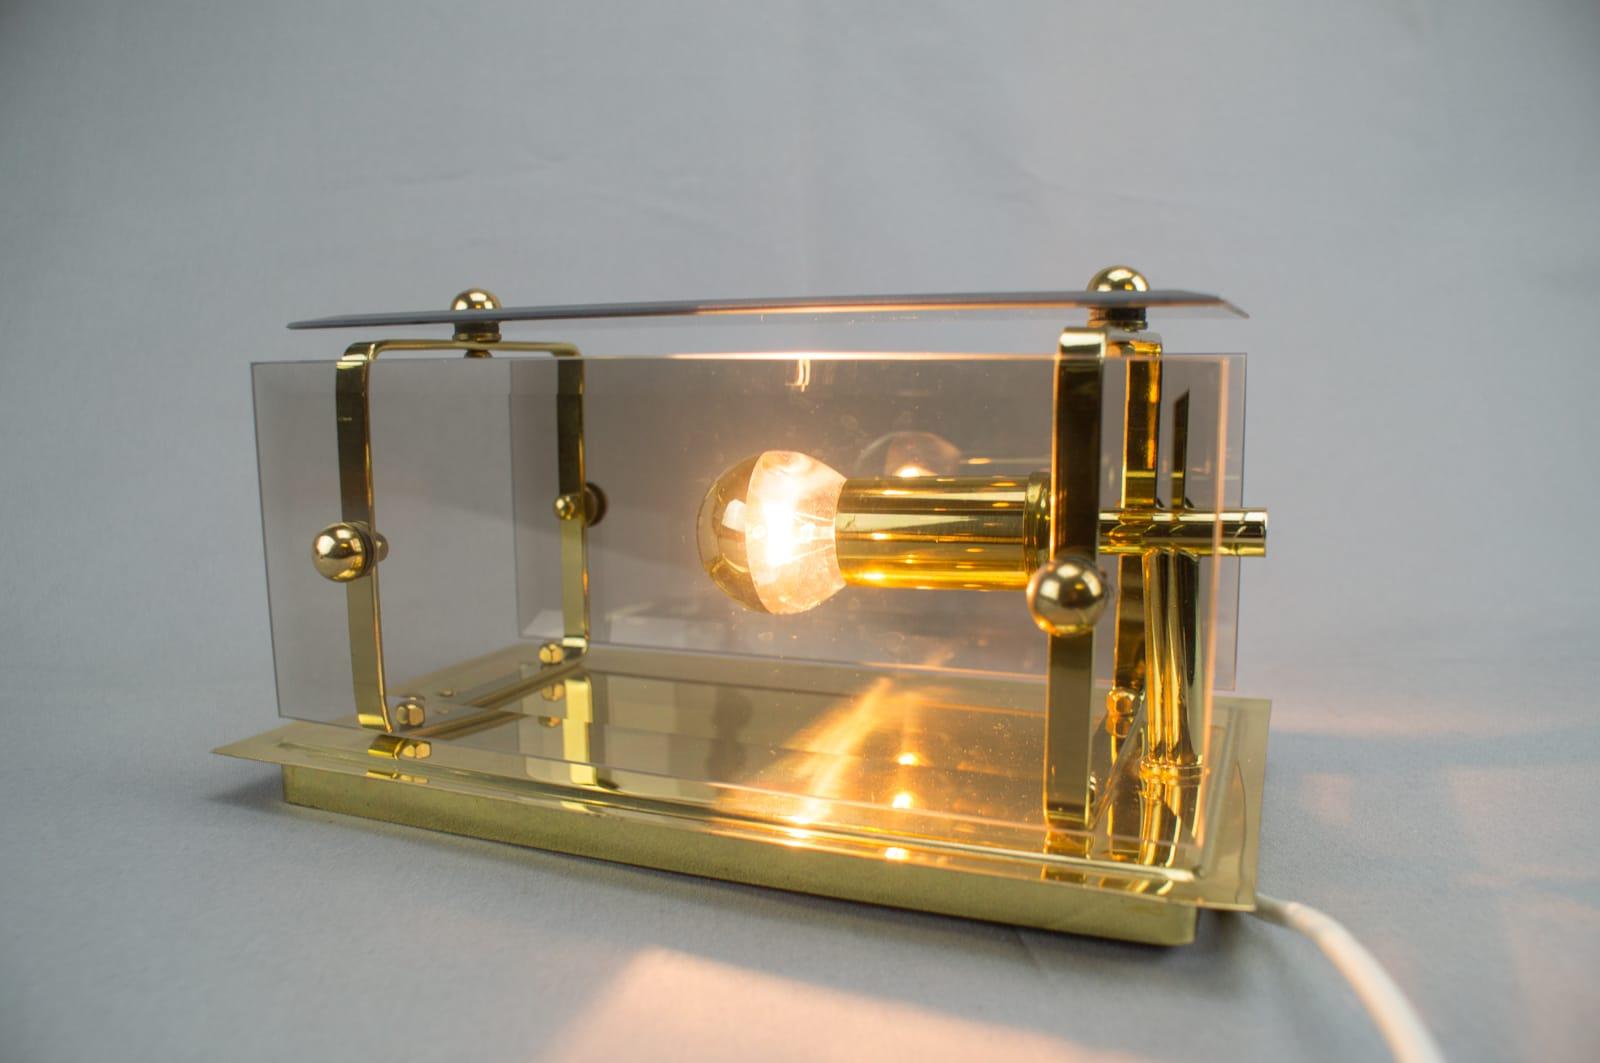 Set of 5 Elegant Midcentury Brass and Smoked Glass Wall Lamps, Germany, 1960s For Sale 3